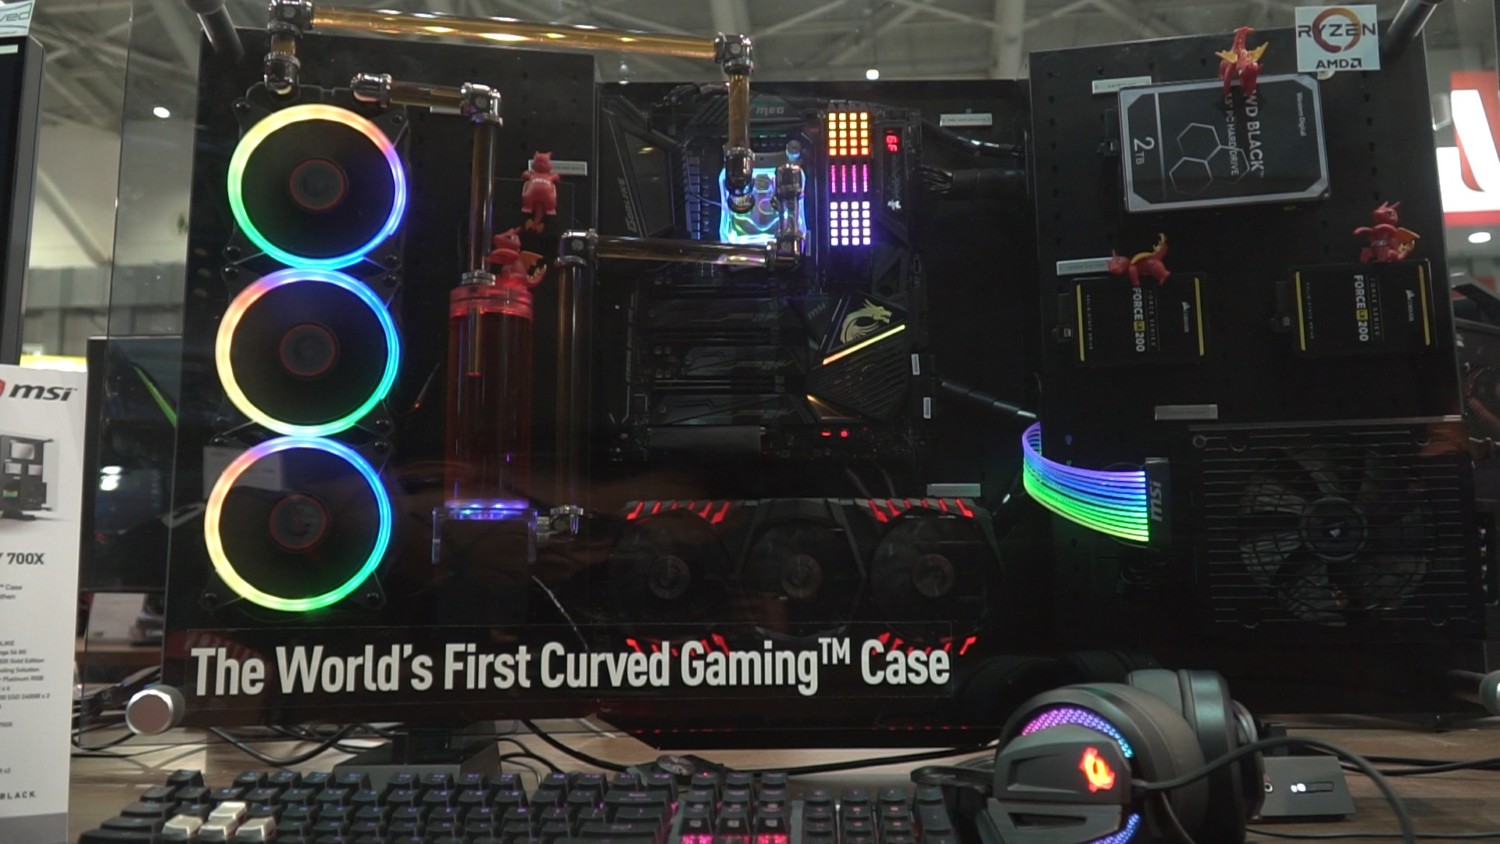 [COMPUTEX 2019] MSI Booth Round-Up: X570 Motherboards, Lighting Graphics Cards, New Case and New Monitor - returnal